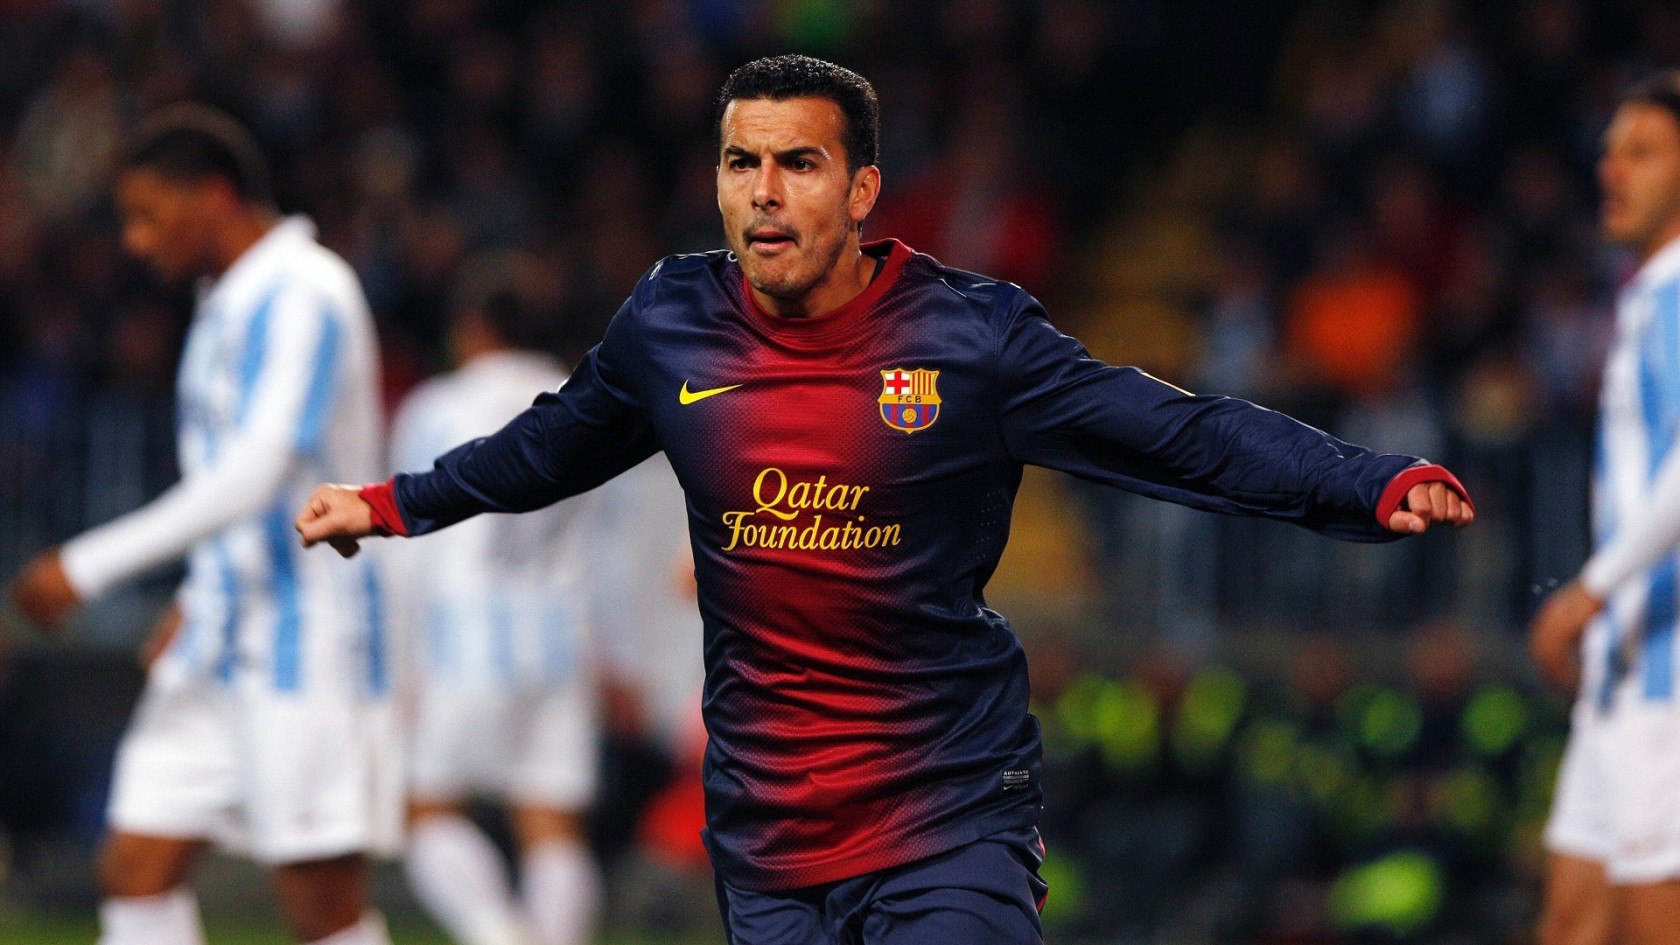 Pedro’s agent: “Inter is only a hypothesis at the moment”